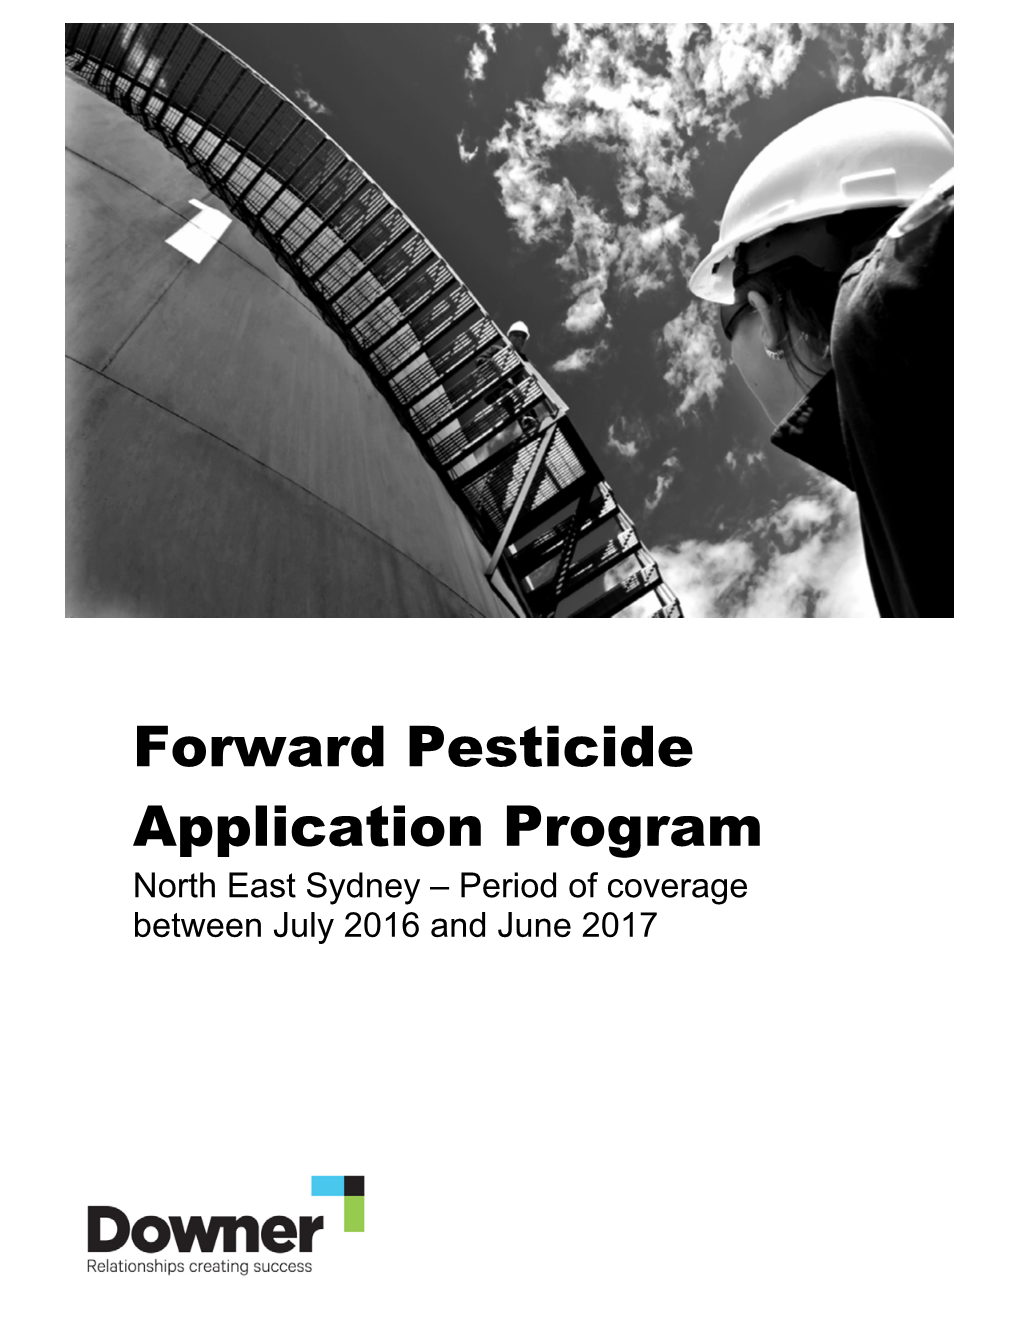 Forward Pesticide Application Program North East Sydney – Period of Coverage Between July 2016 and June 2017